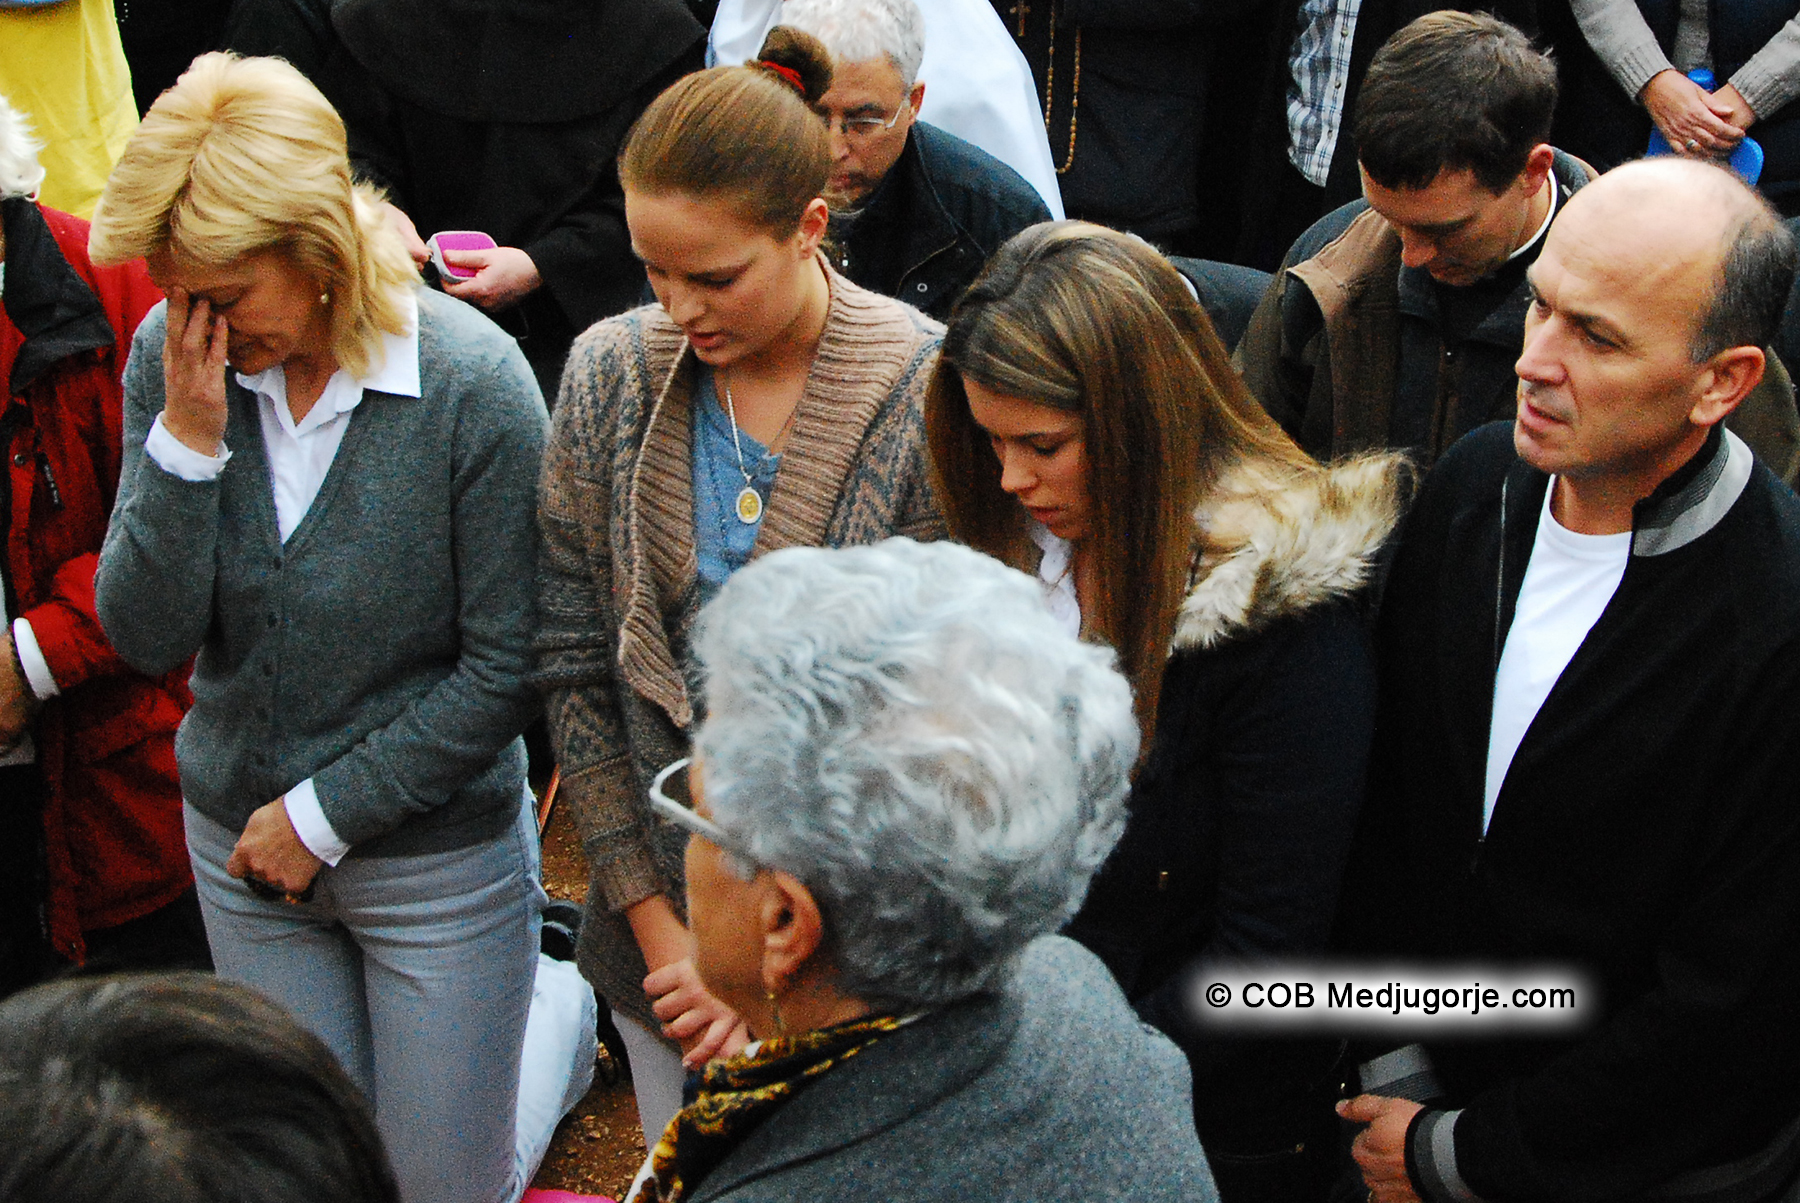 Mirjana praying in anticipation of the apparition of Our Lady